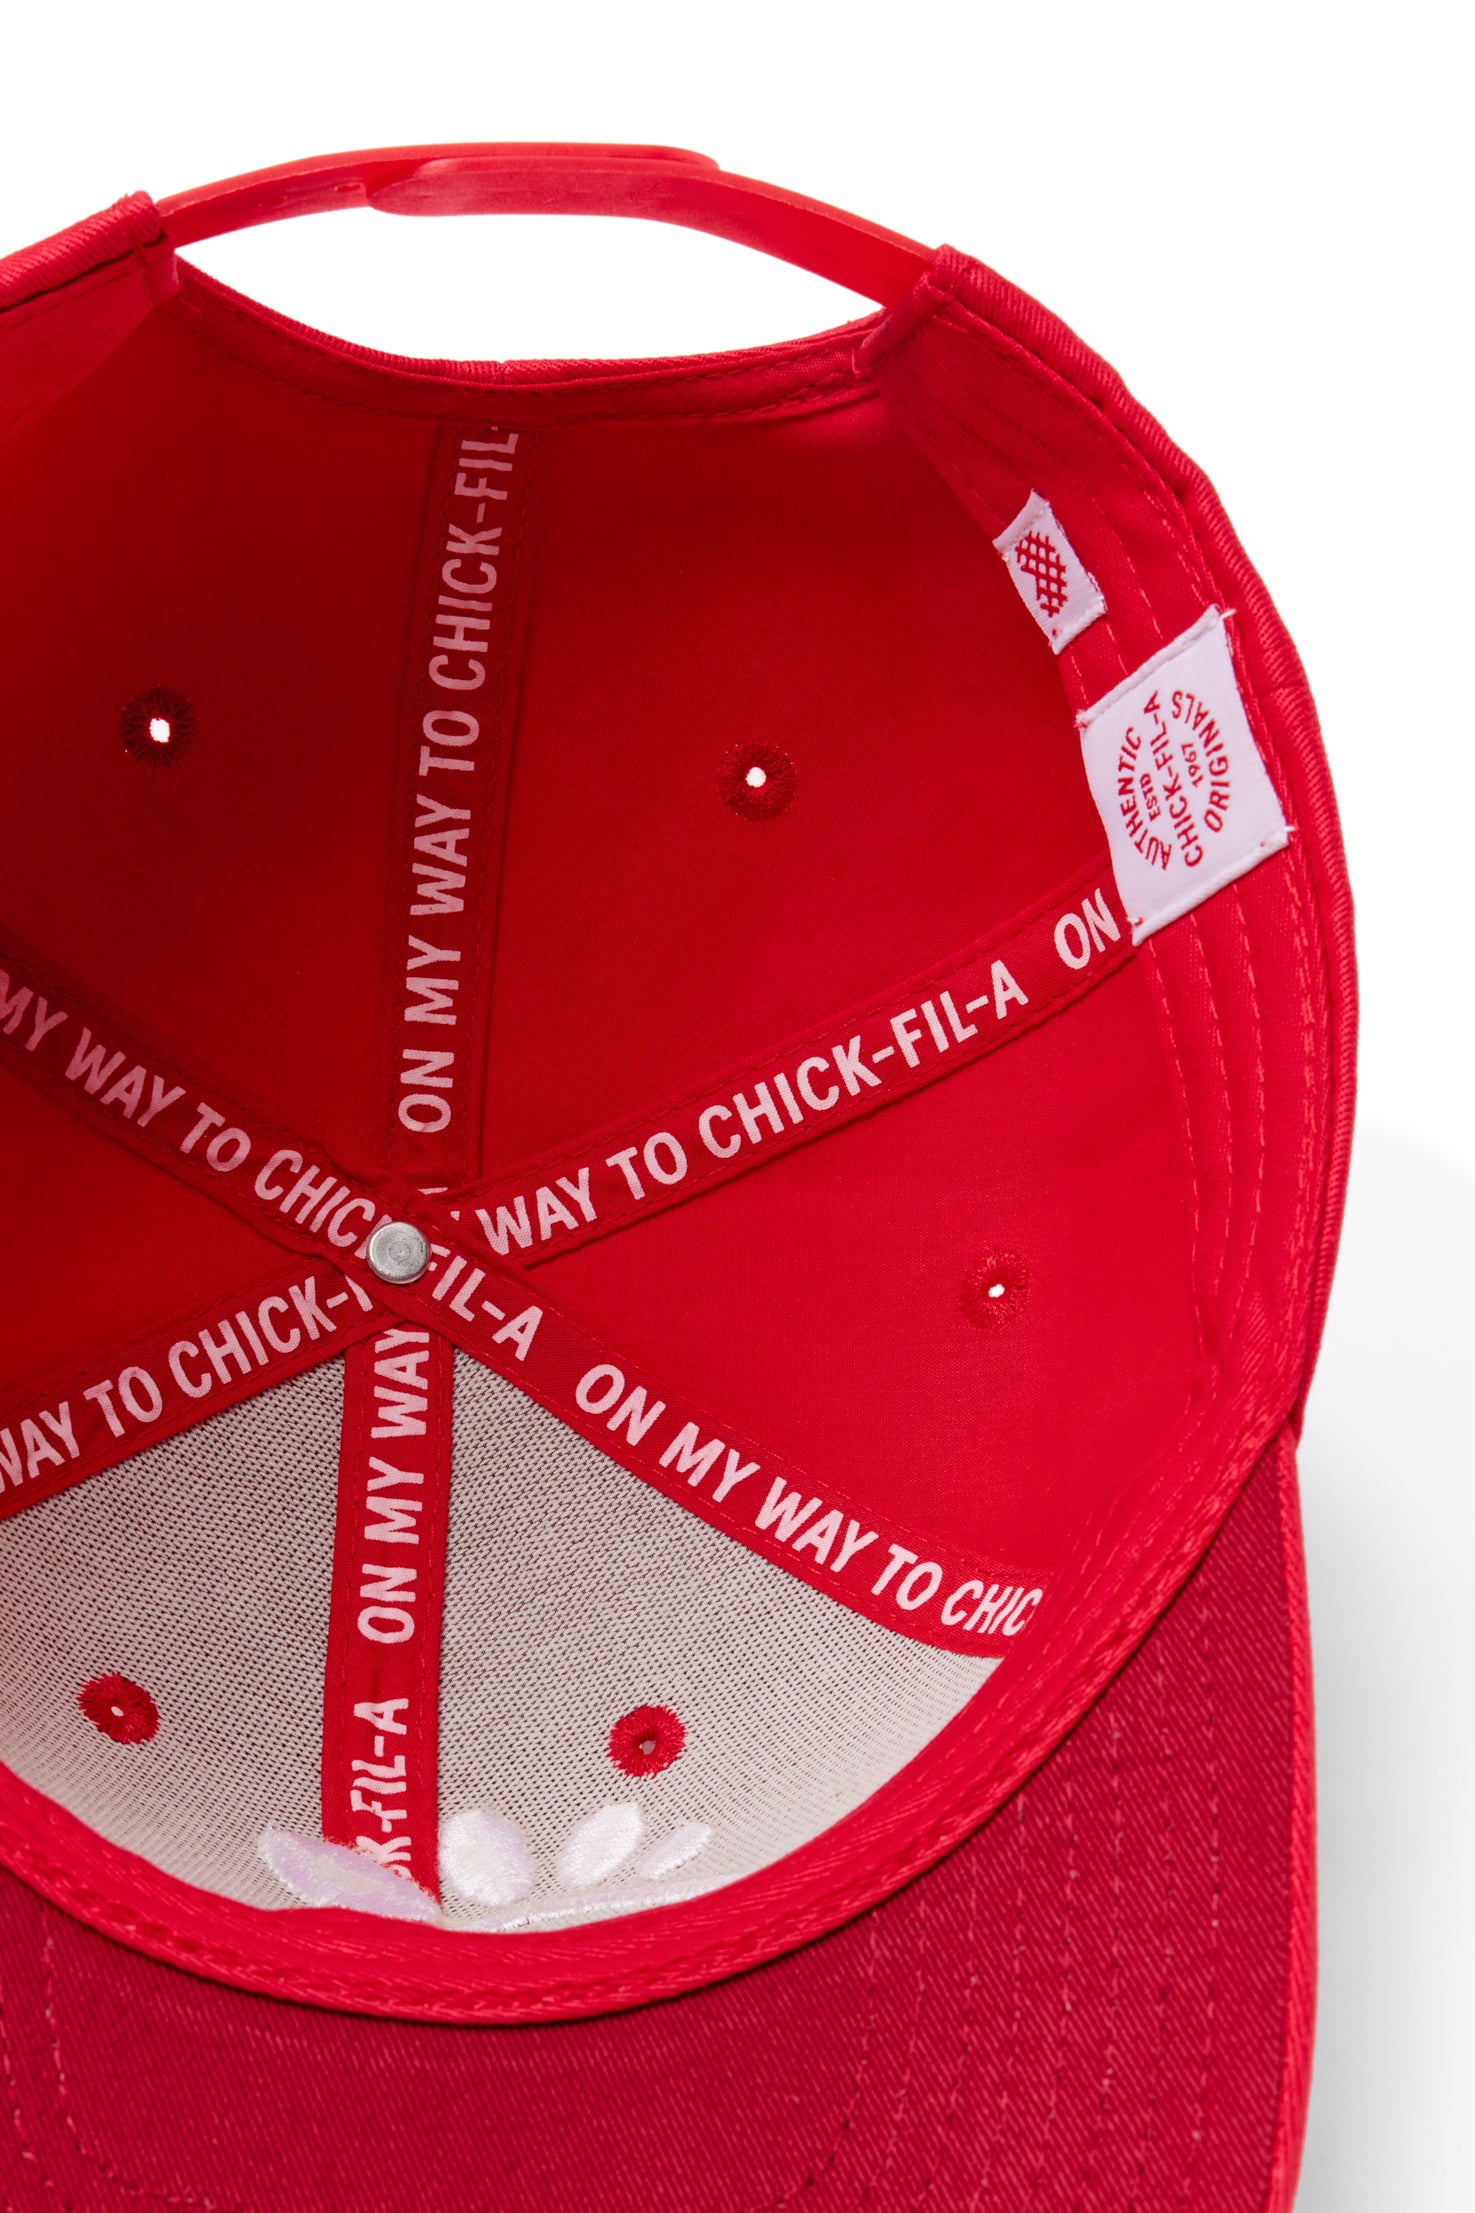 Inside of Classic Chick-fil-A Embroidered Hat showing “On my way to Chick-fil-A” tape detail